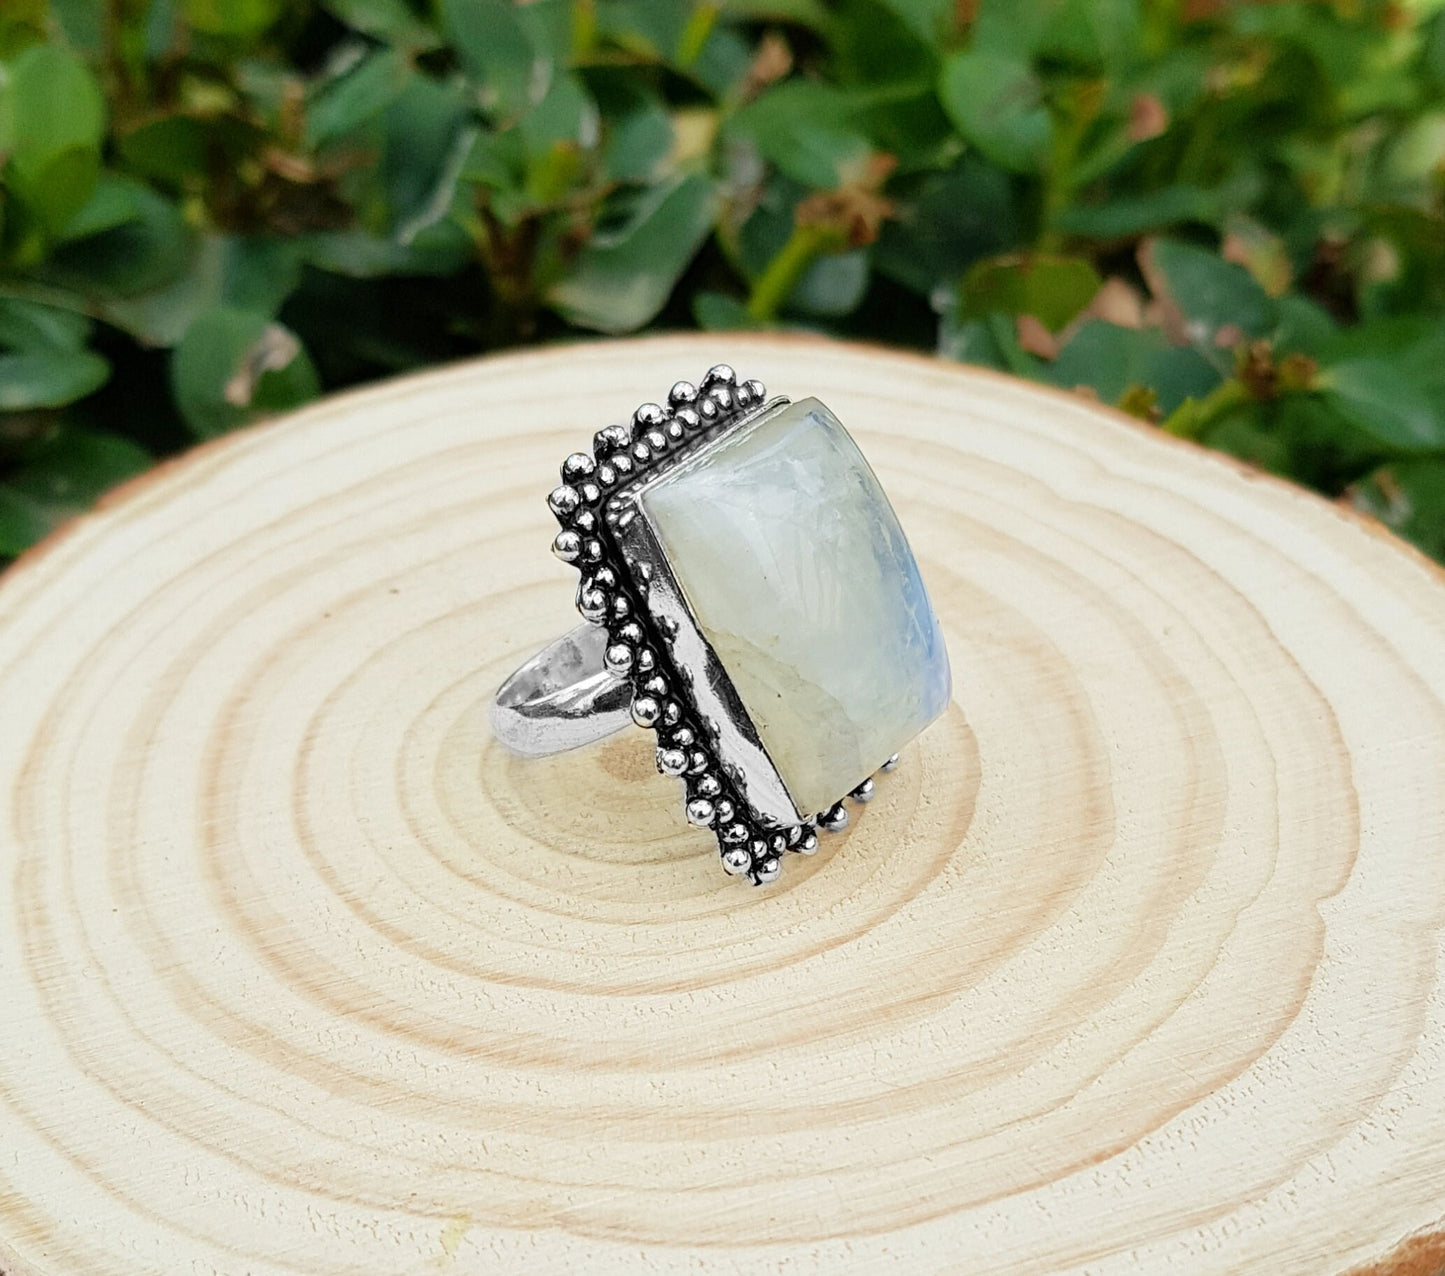 Rainbow Moonstone Statement Ring Sterling Silver Boho Rings Size US 7 Unique Jewelry One Of A Kind Gift GypsyJewelry